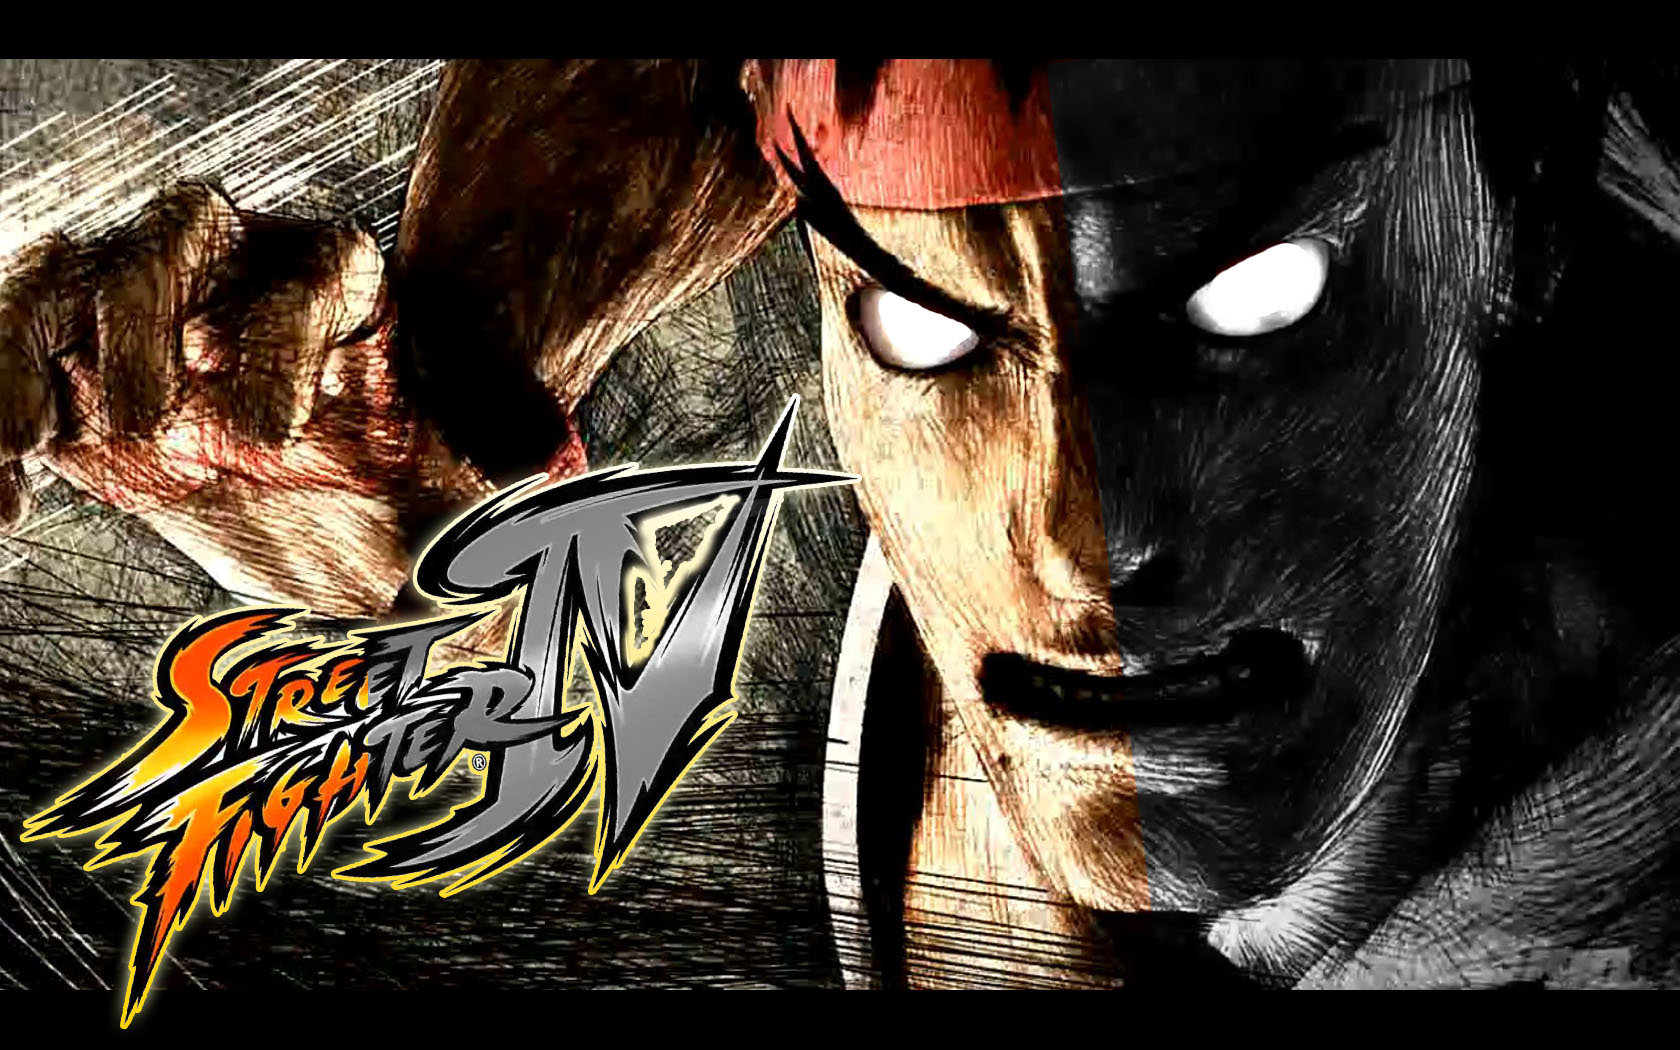 Free Street Fighter High Quality Wallpaper Id - Super Street Fighter 4 - HD Wallpaper 